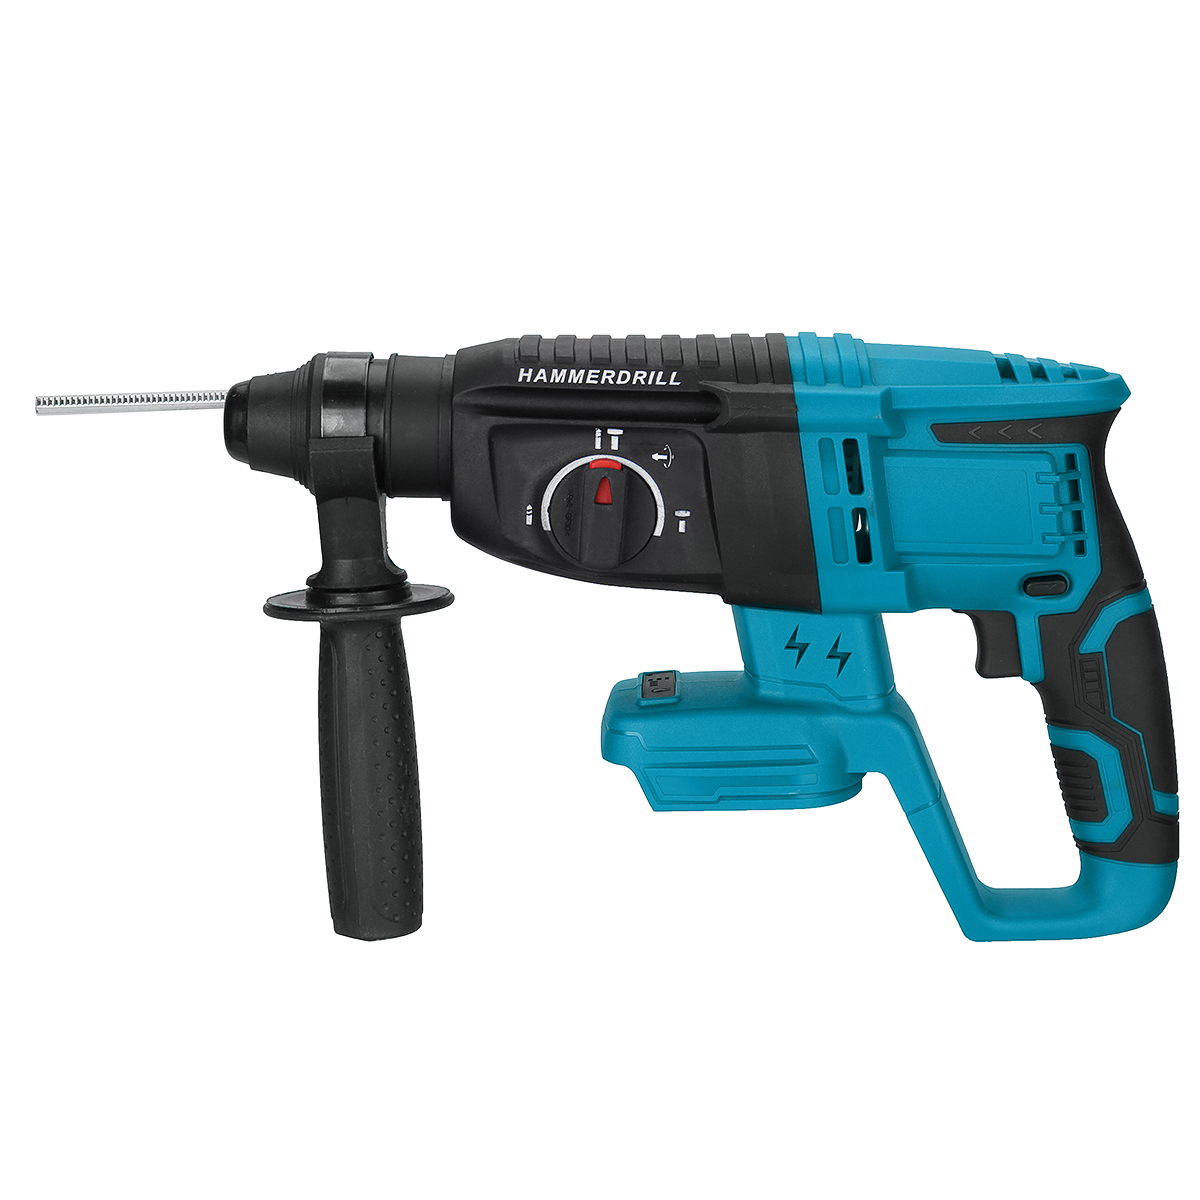 Find Drillpro 4800bpm Electric Rotary Hammer Drill W/ Rotation Handle Punch Chisel Power Tool For Makita 18V Battery for Sale on Gipsybee.com with cryptocurrencies